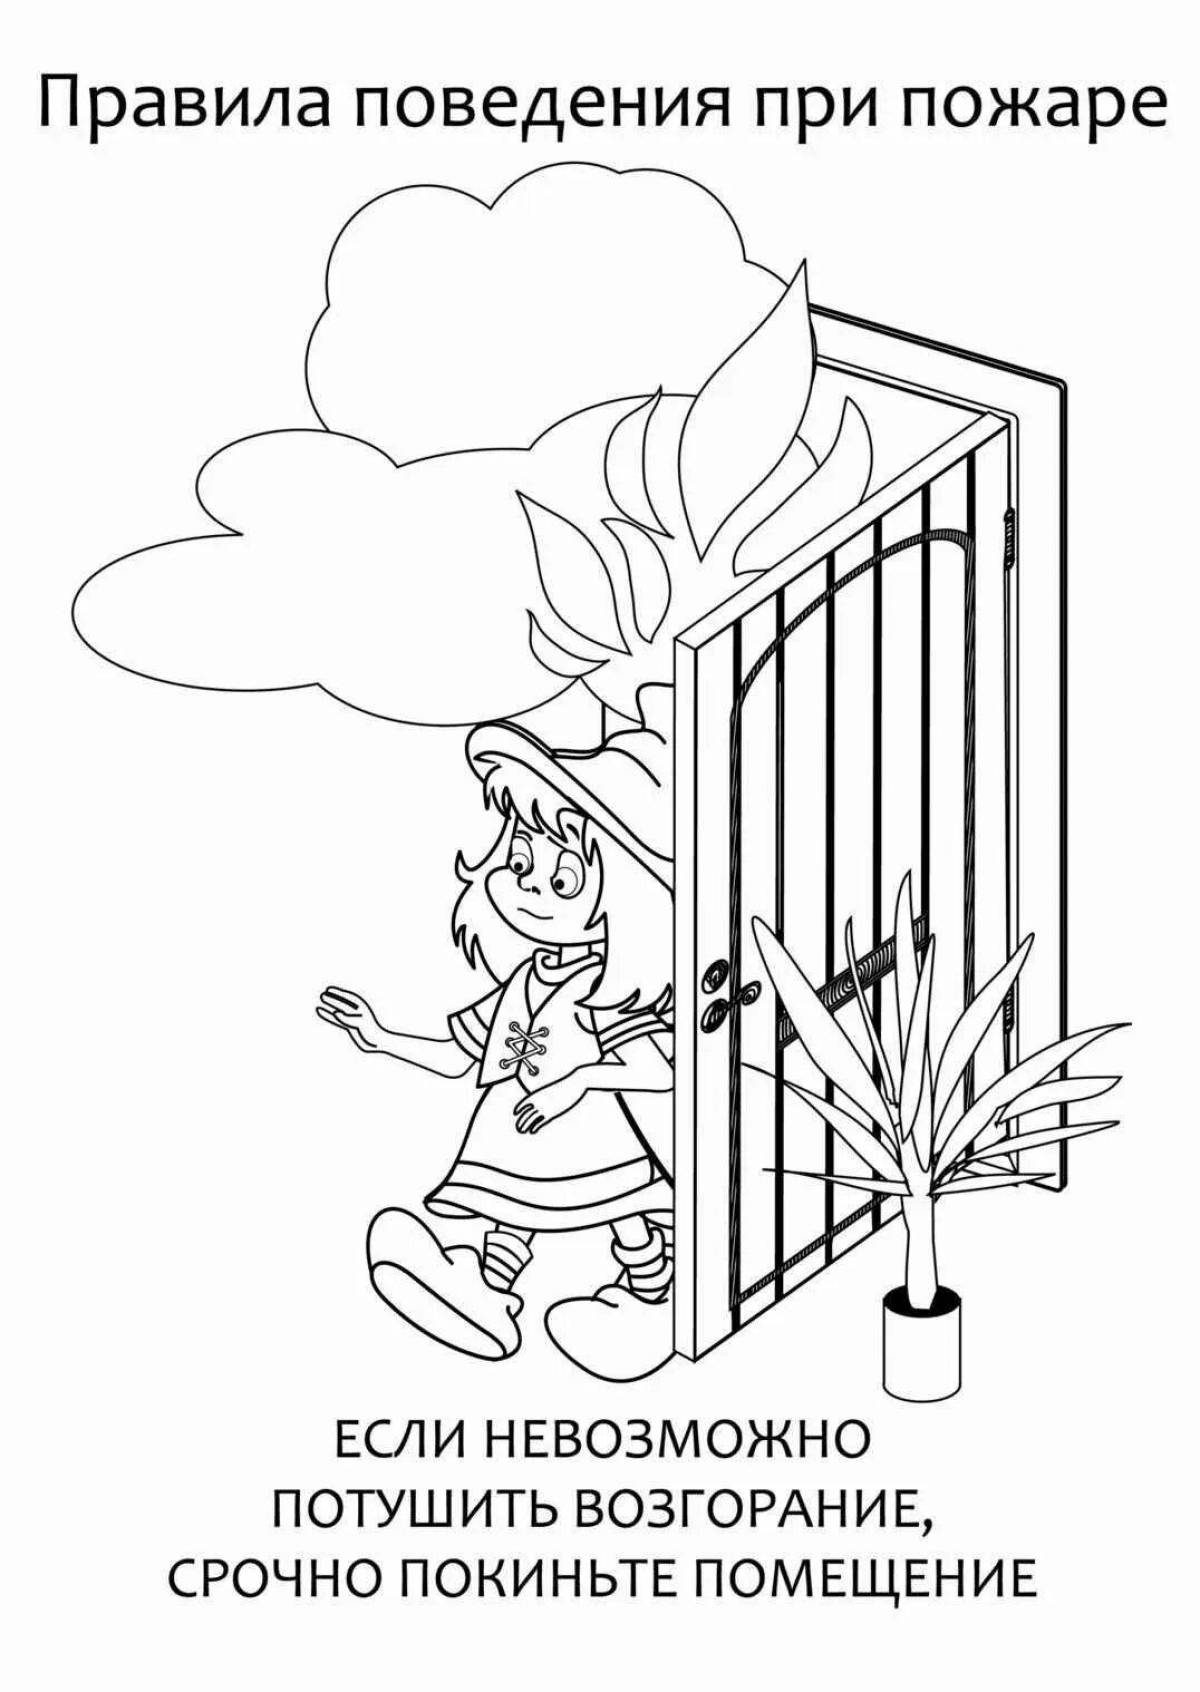 Creative Home Security Coloring Page